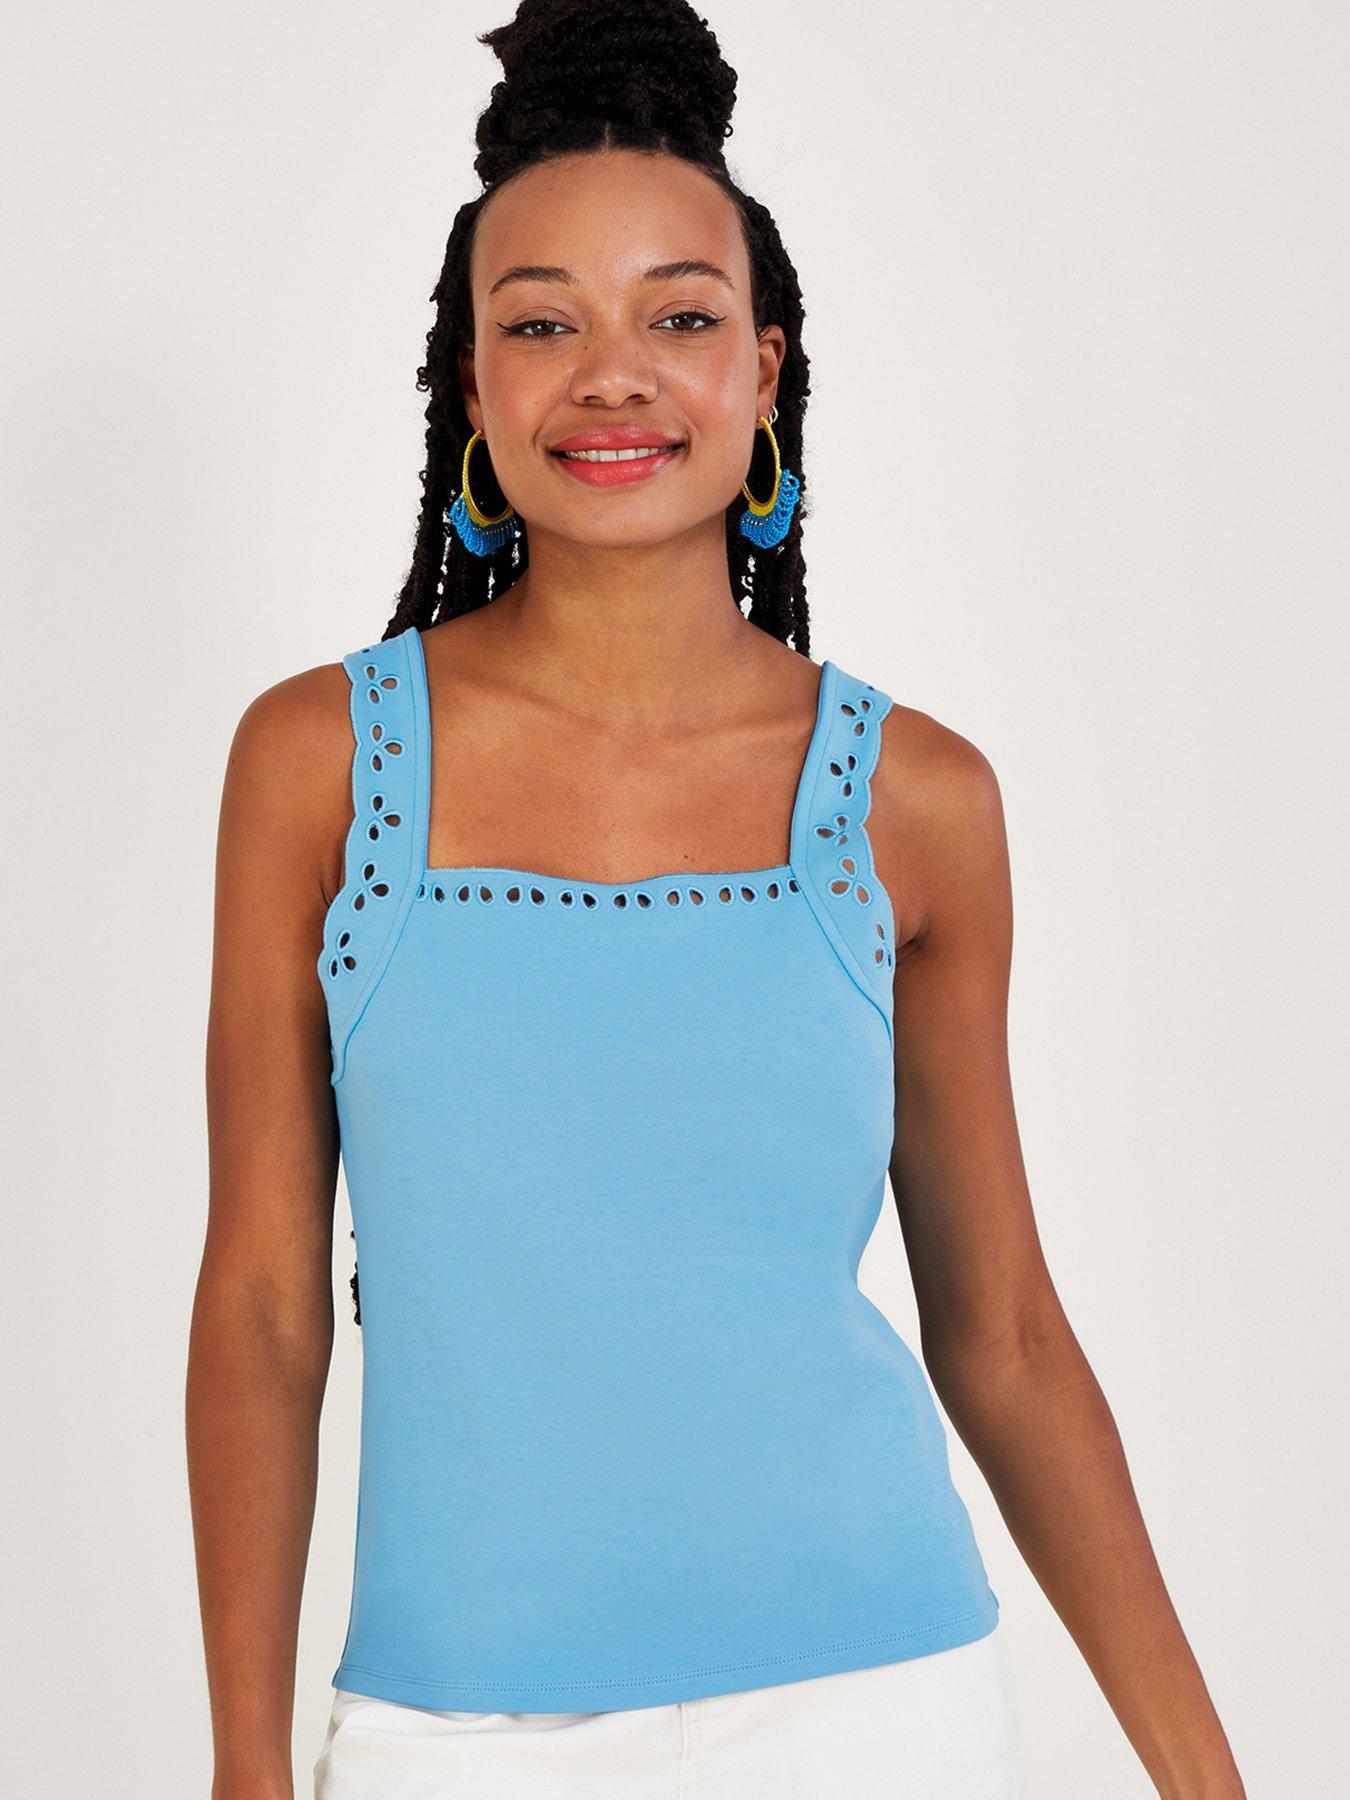 Monsoon Embroidered Tank Top, Denim Blue, S